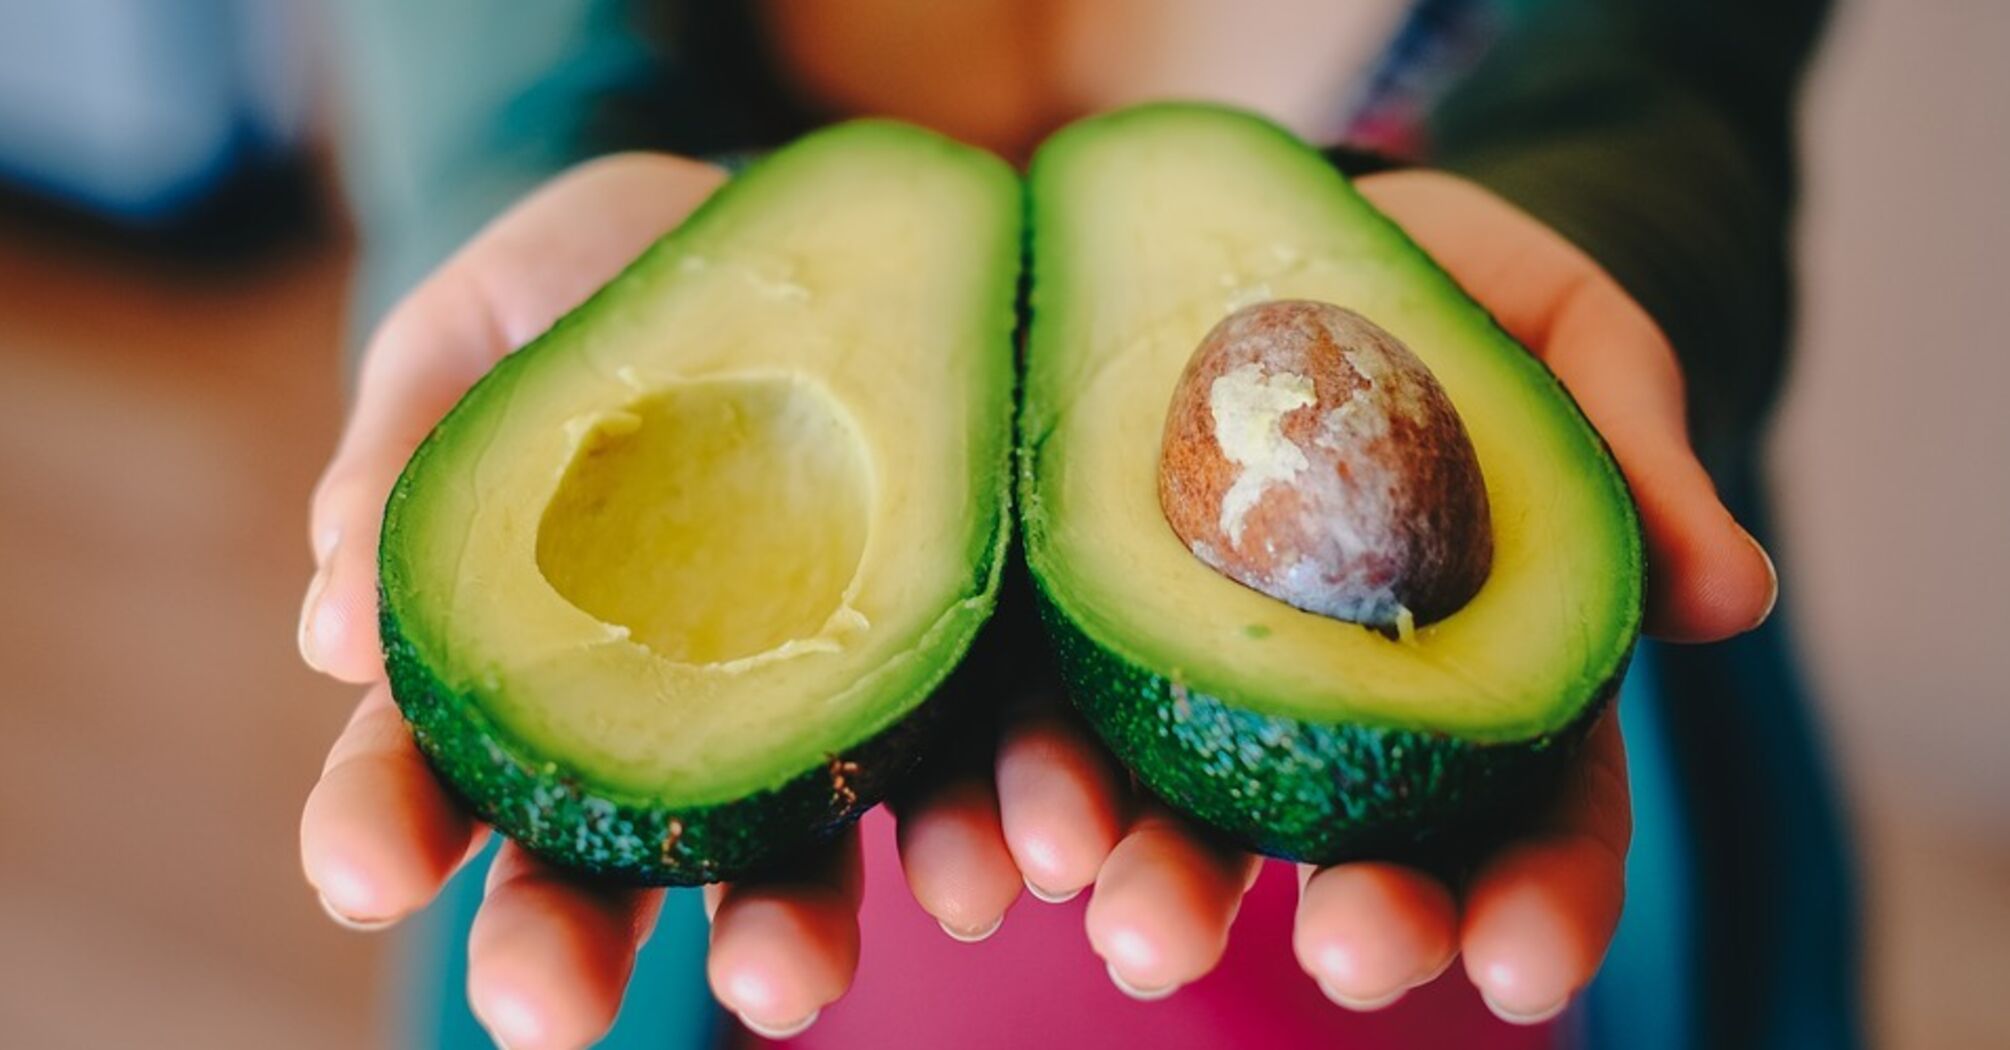 Why avocados are good for you